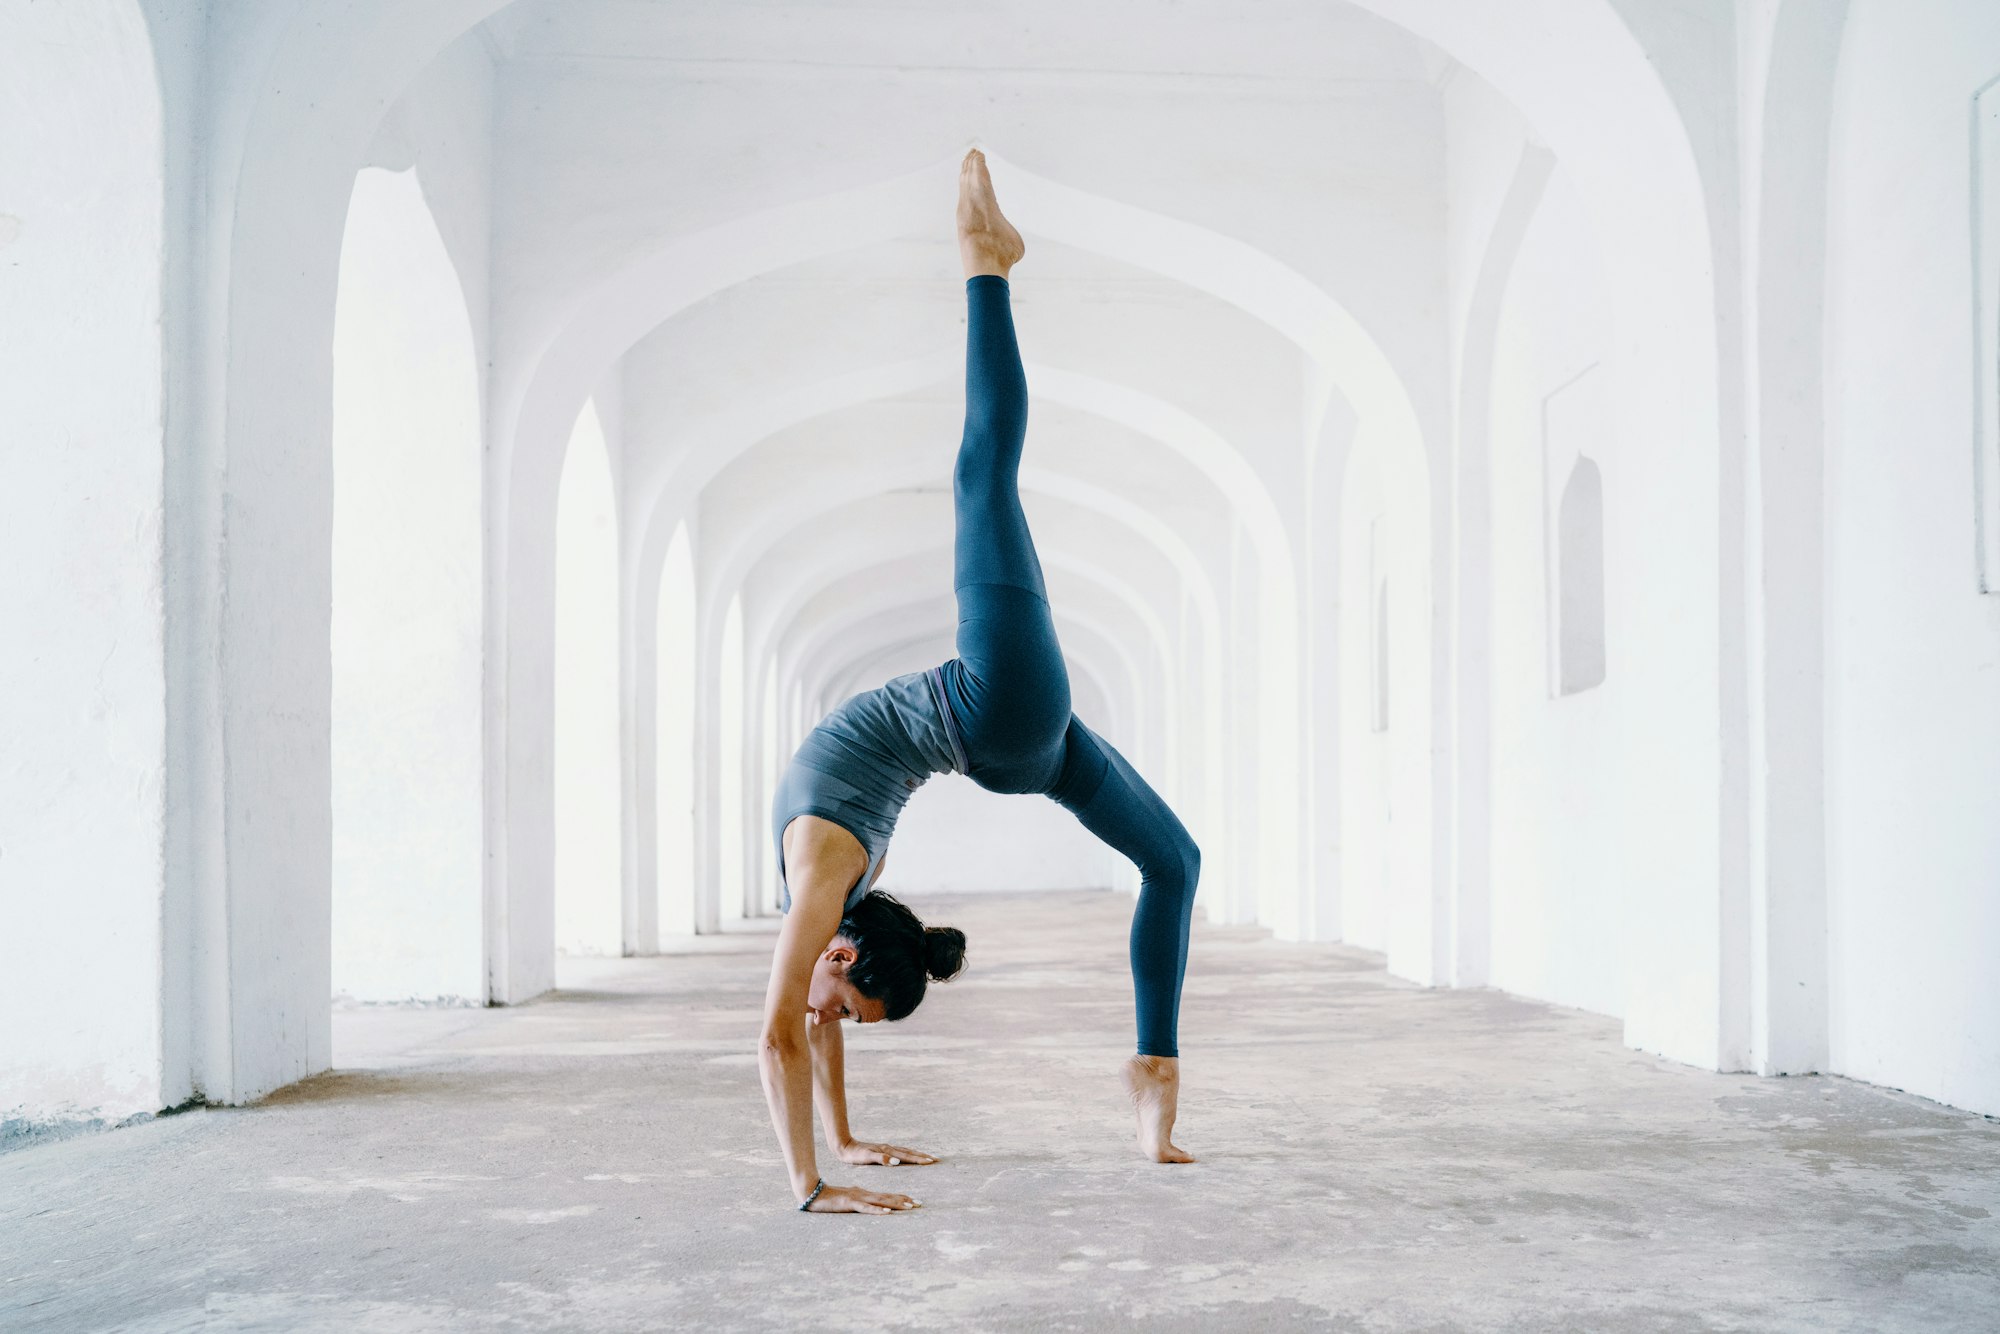 A flexible yogini doing a backbend pose in the middle of a white archway. Photo by Oksana Taran.